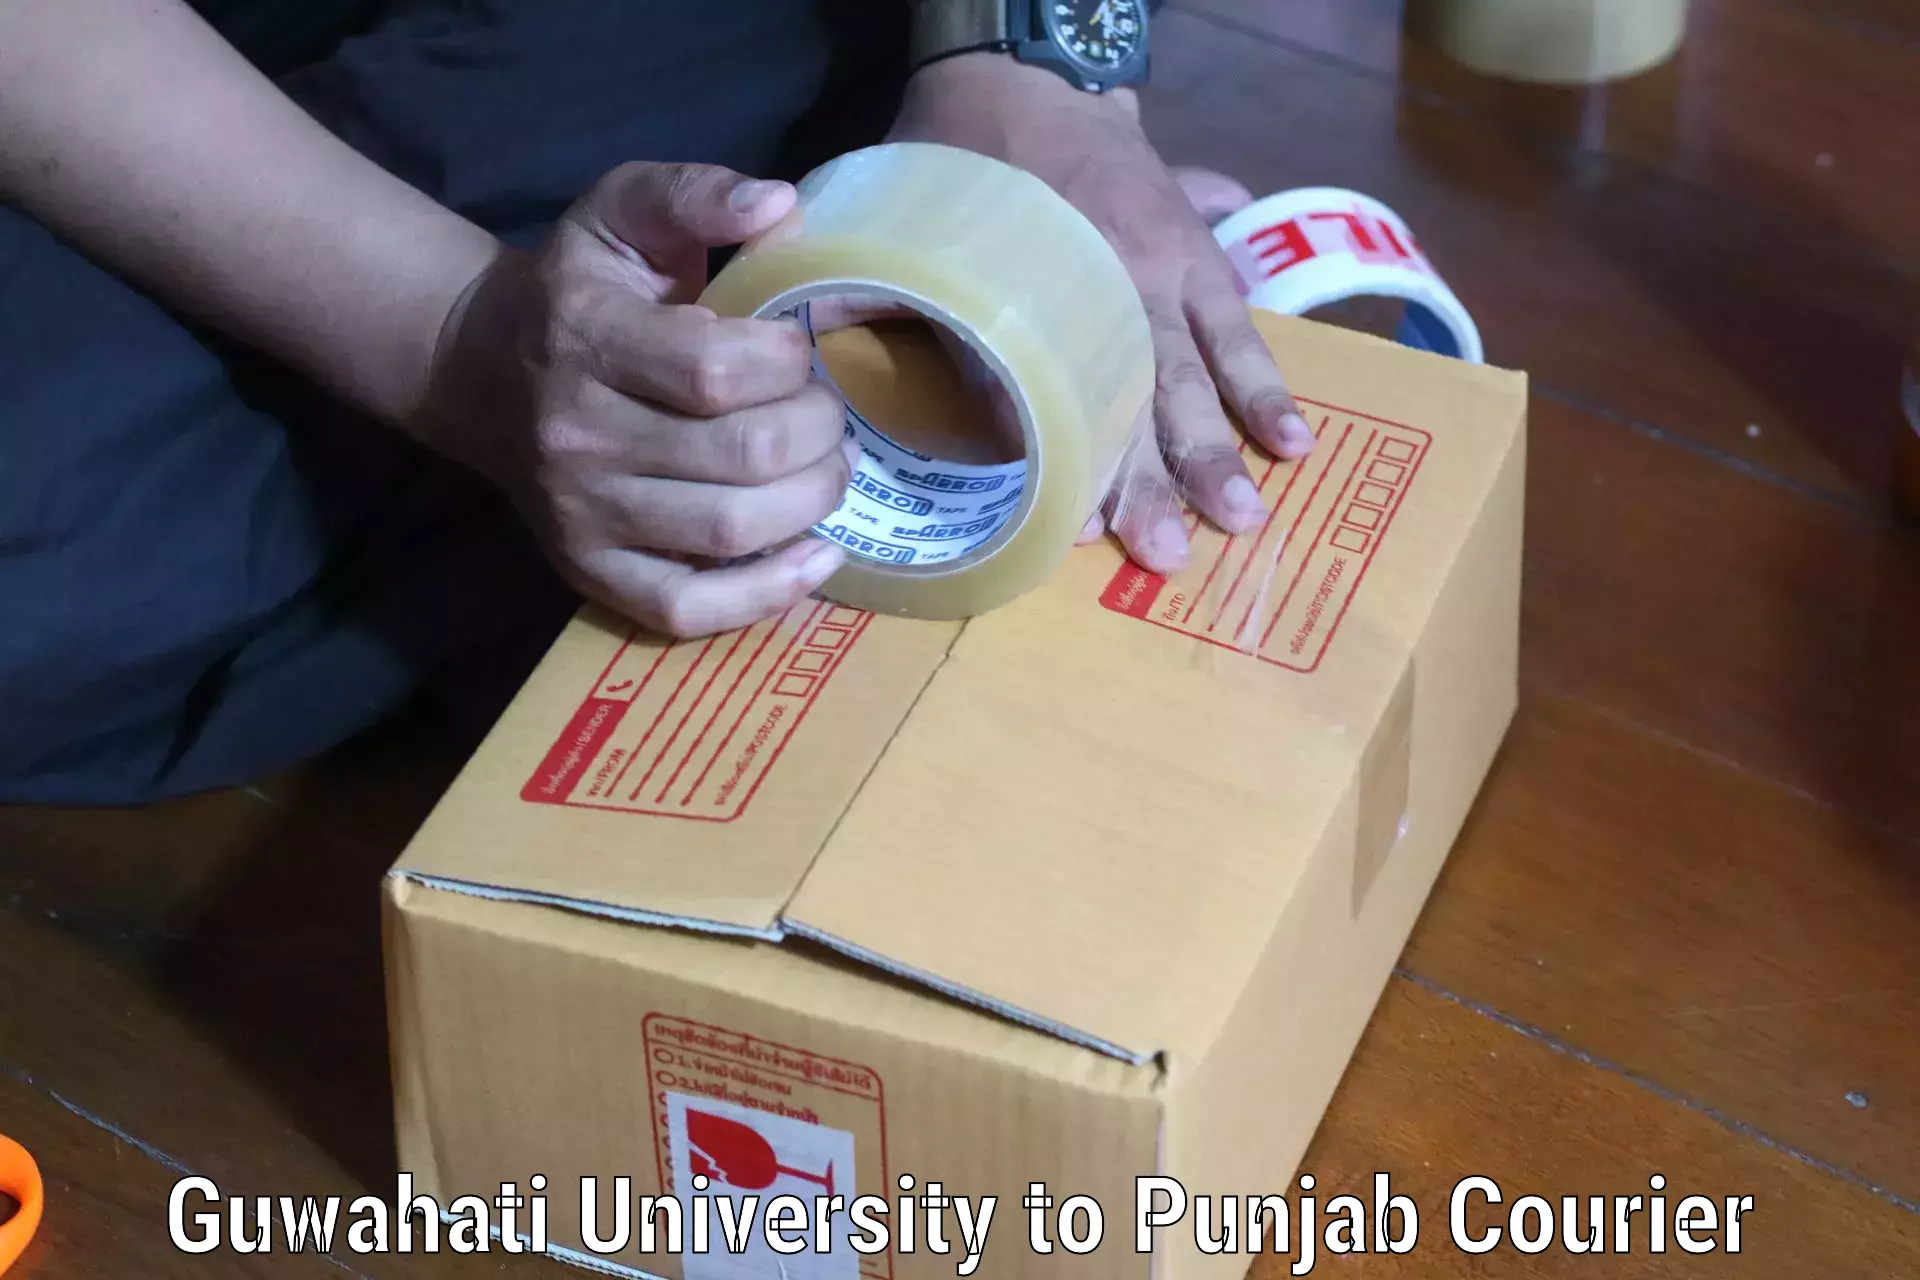 Advanced package delivery in Guwahati University to Kapurthala